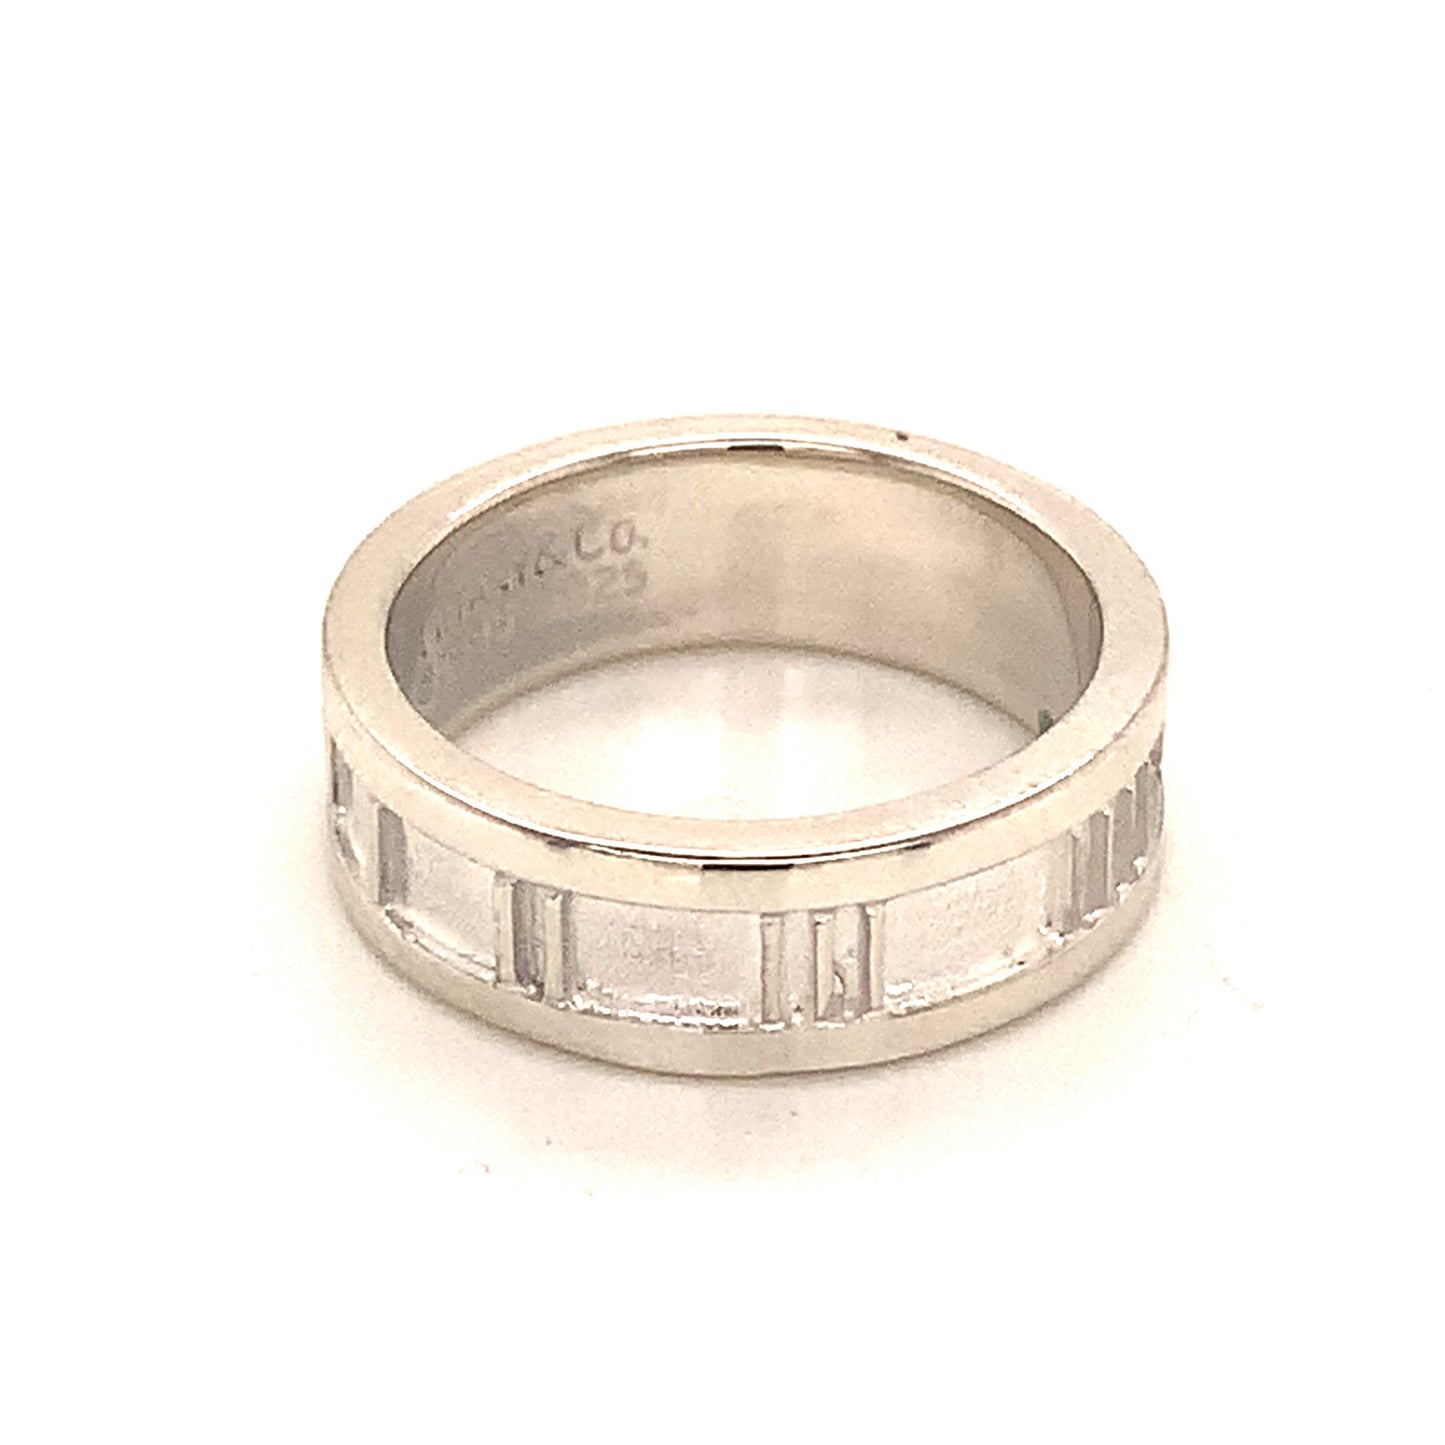 Tiffany & Co Estate Ring Size 4.75 Sterling Silver 4.7 Grams TIF106 - Certified Estate Jewelry